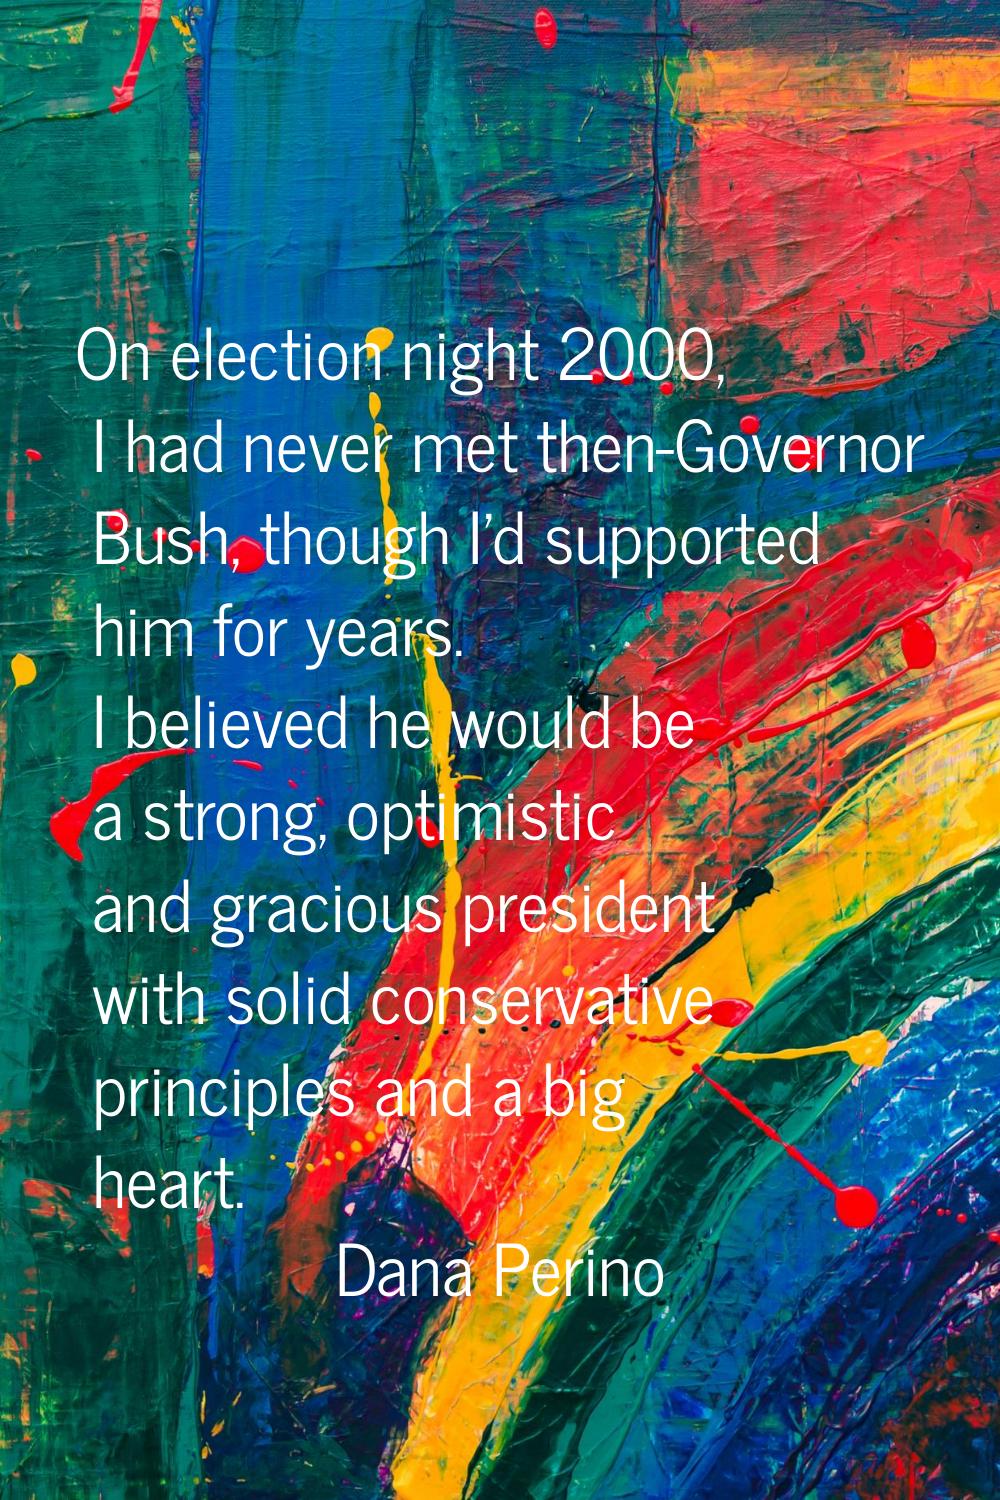 On election night 2000, I had never met then-Governor Bush, though I'd supported him for years. I b